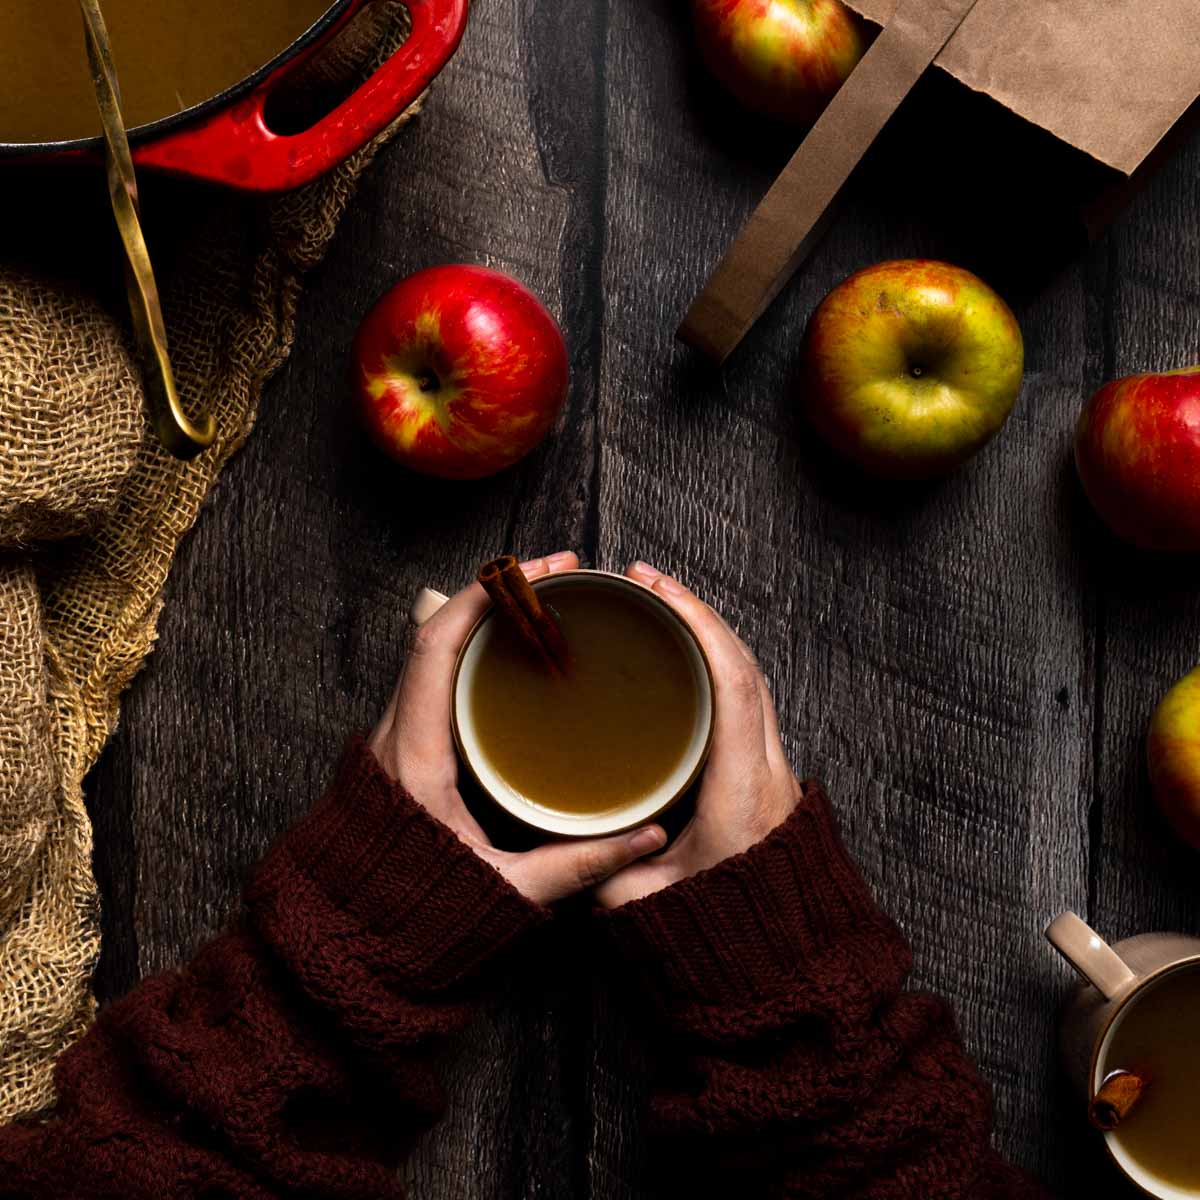 Two hands cradling a mug of homemade spiced cider next to apples and burlap